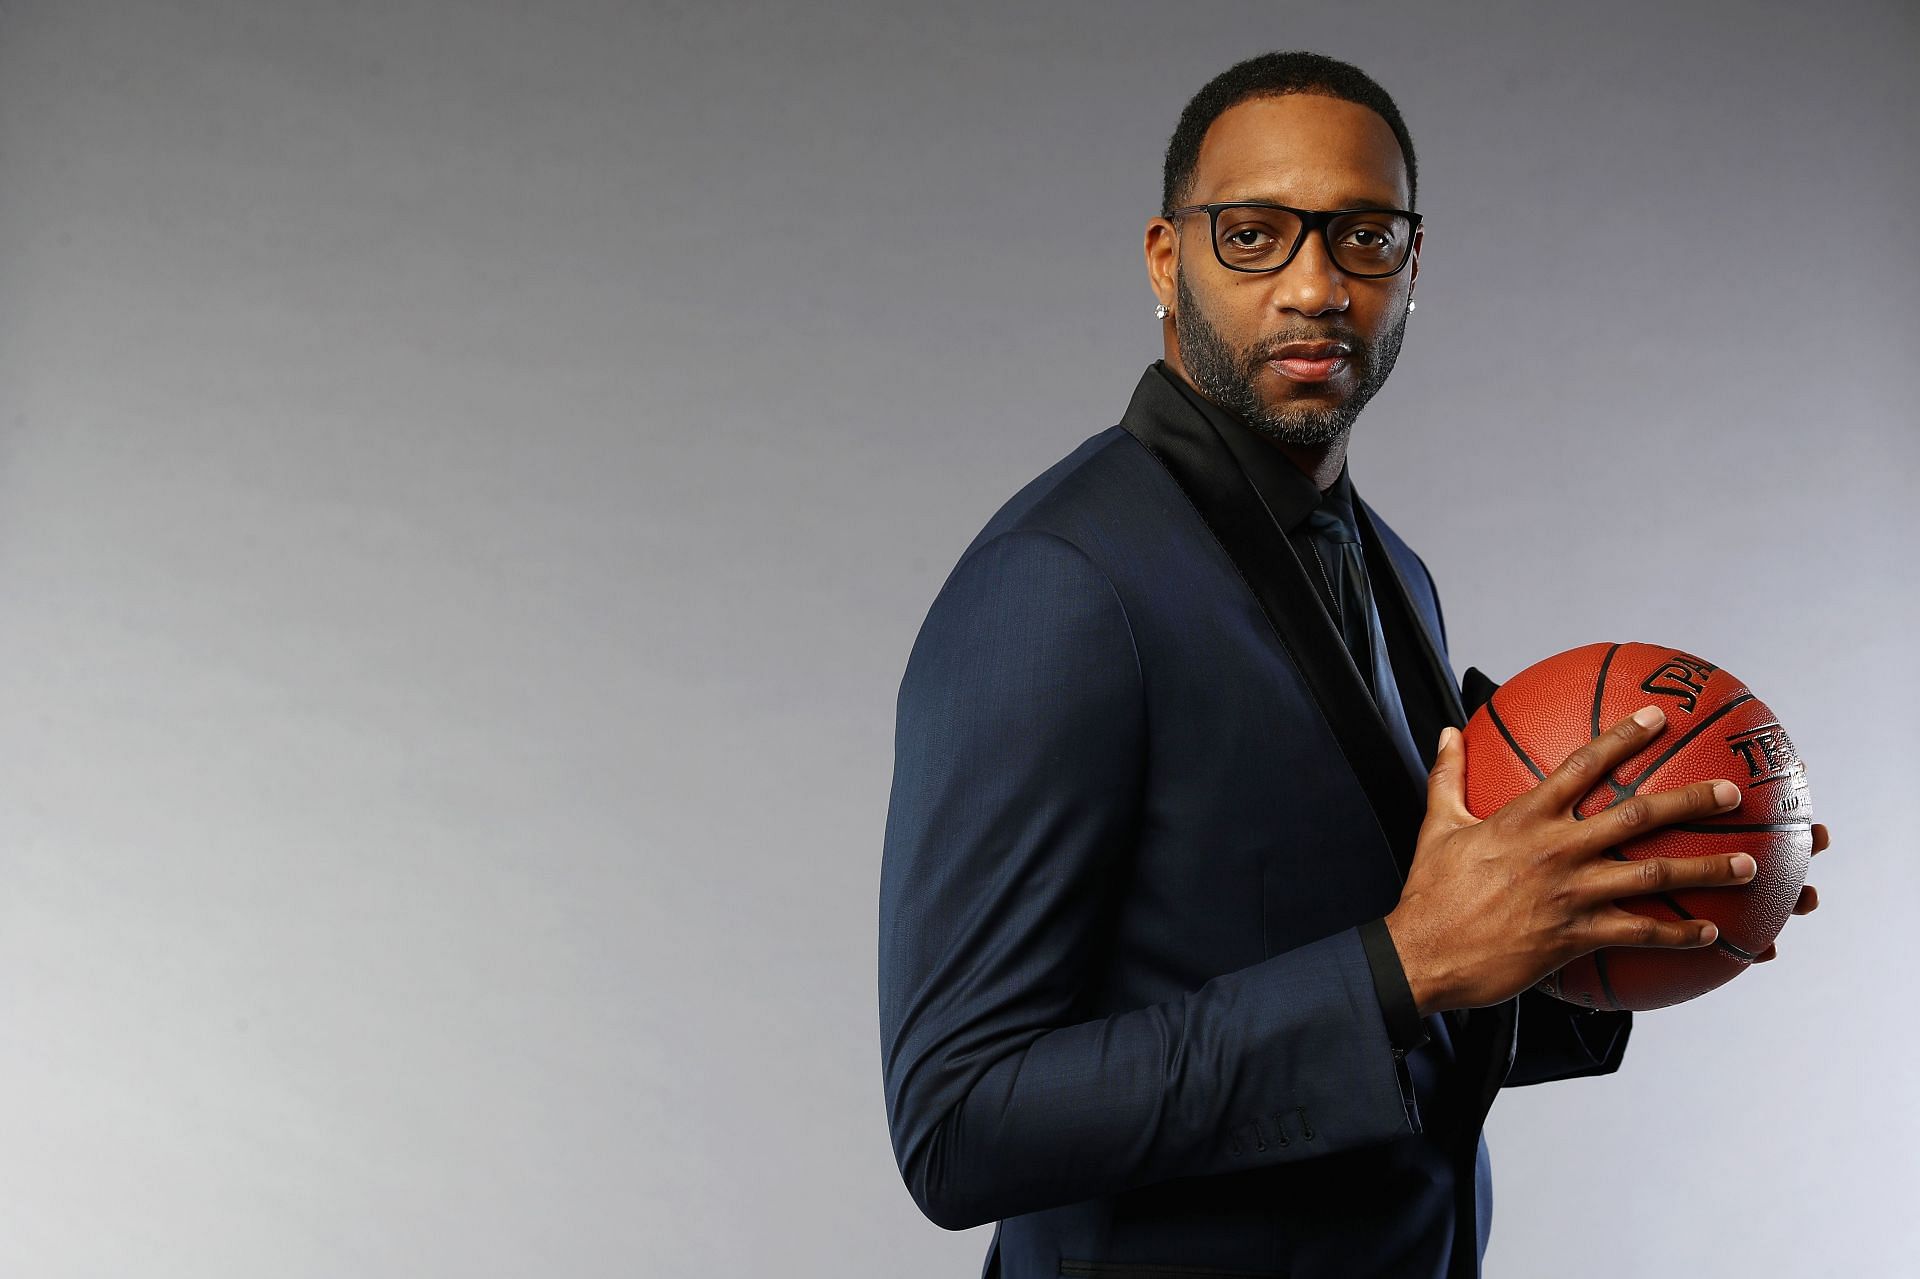 For Tracy McGrady, Hall of Fame induction is his championship